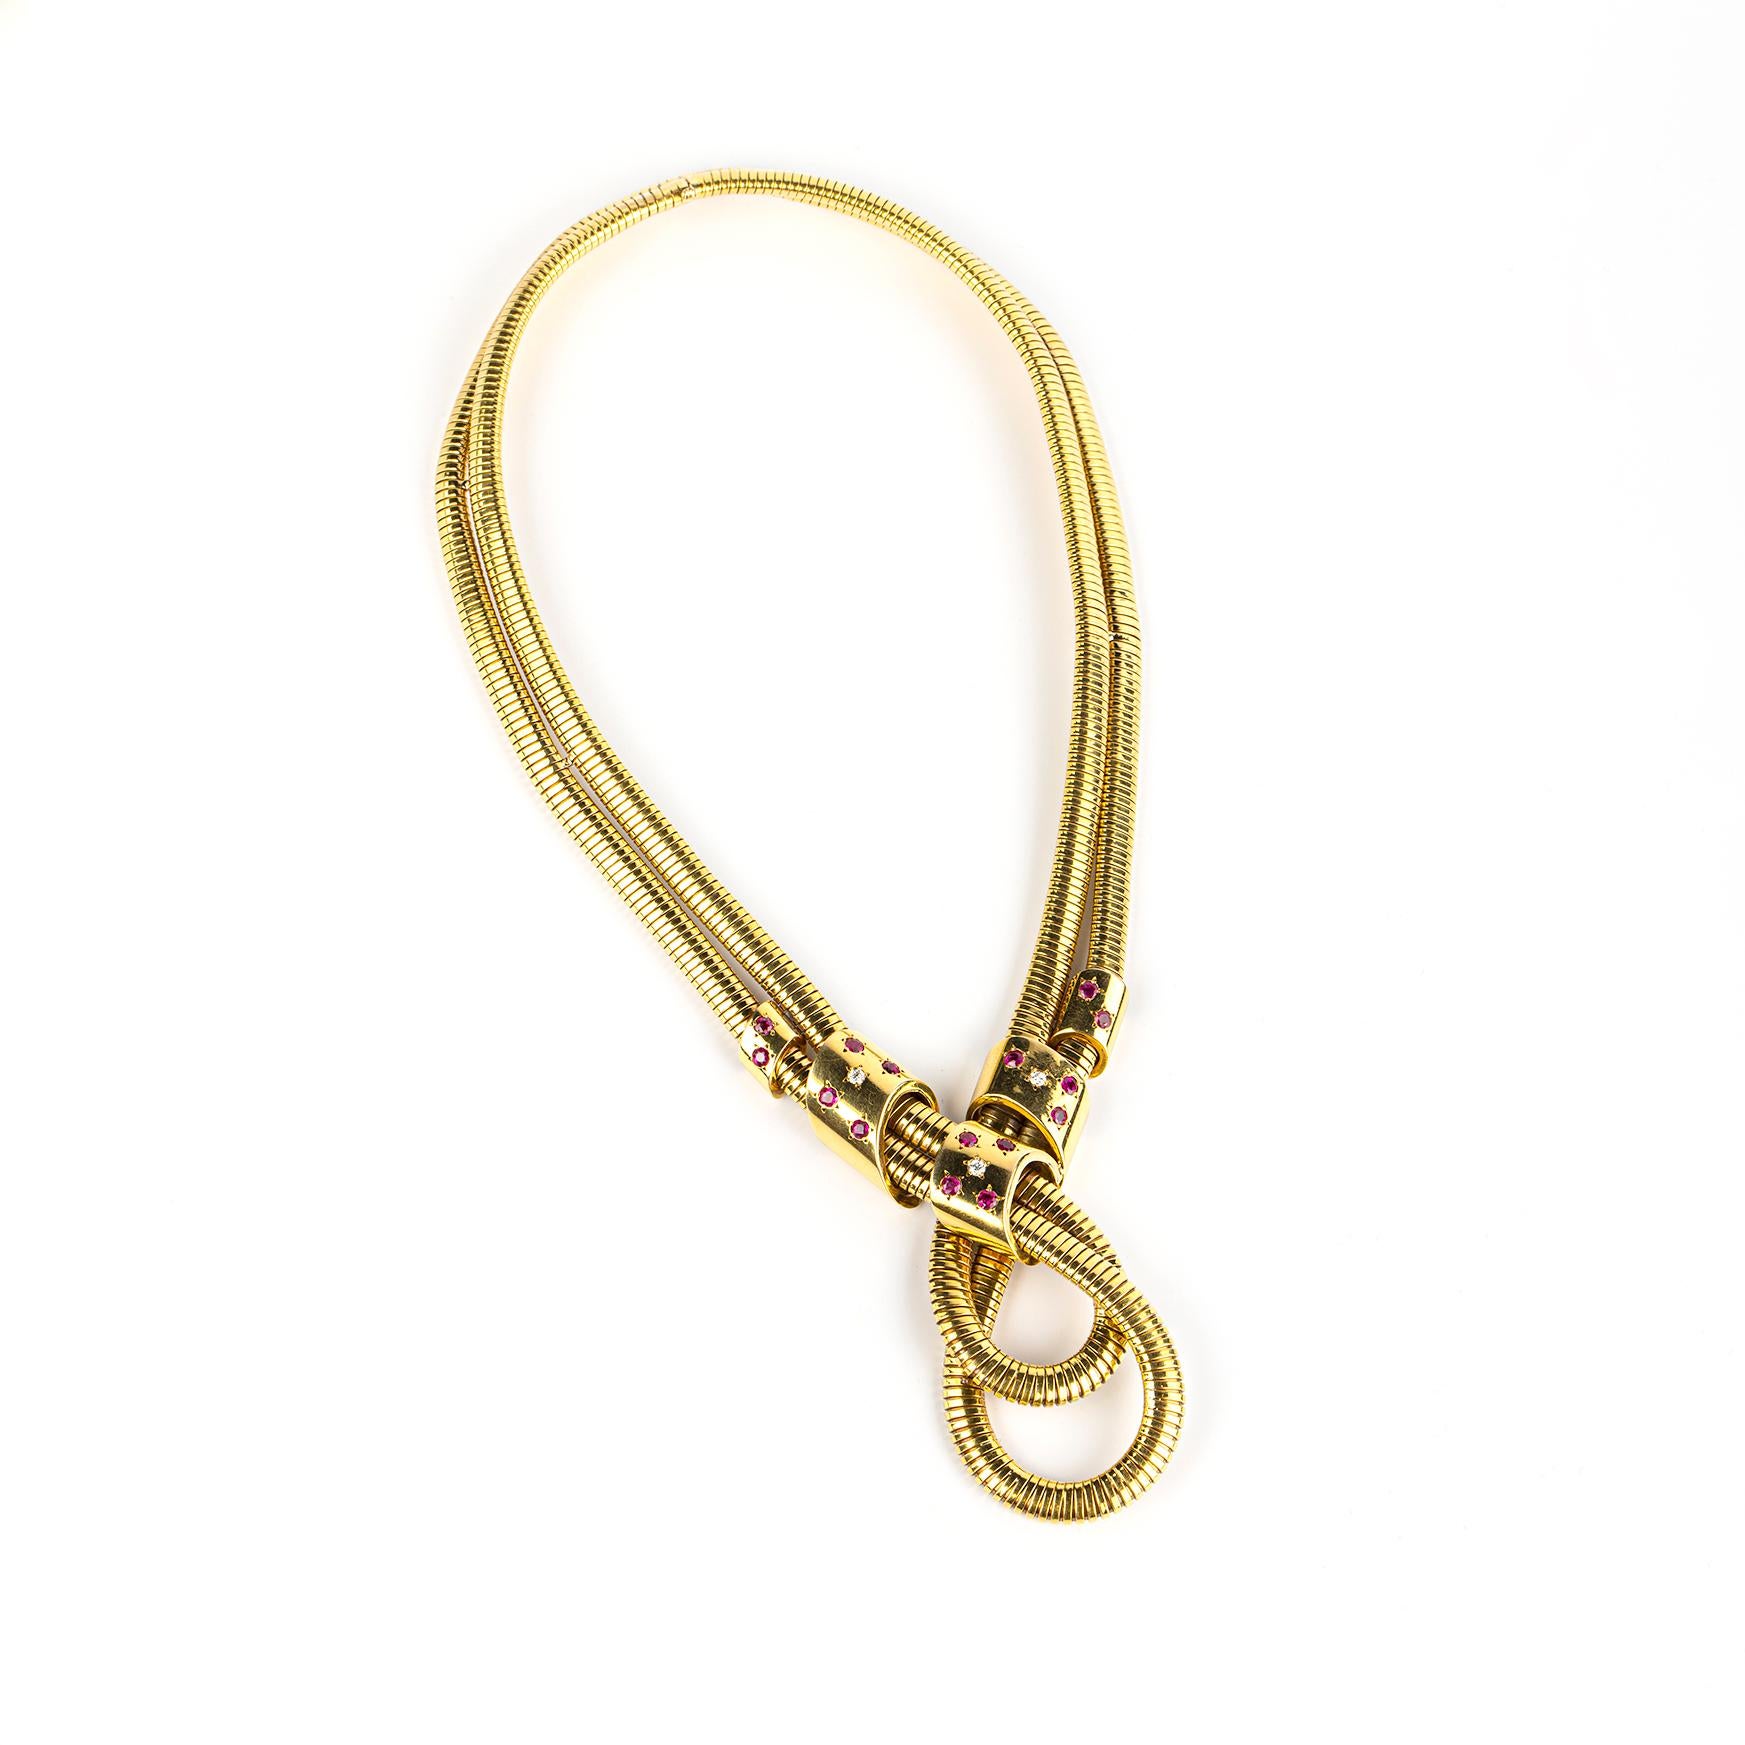 An 18k yellow gold and ruby necklace by Bulgari in the retro Tubogas style. Made in Italy, circa 1950.